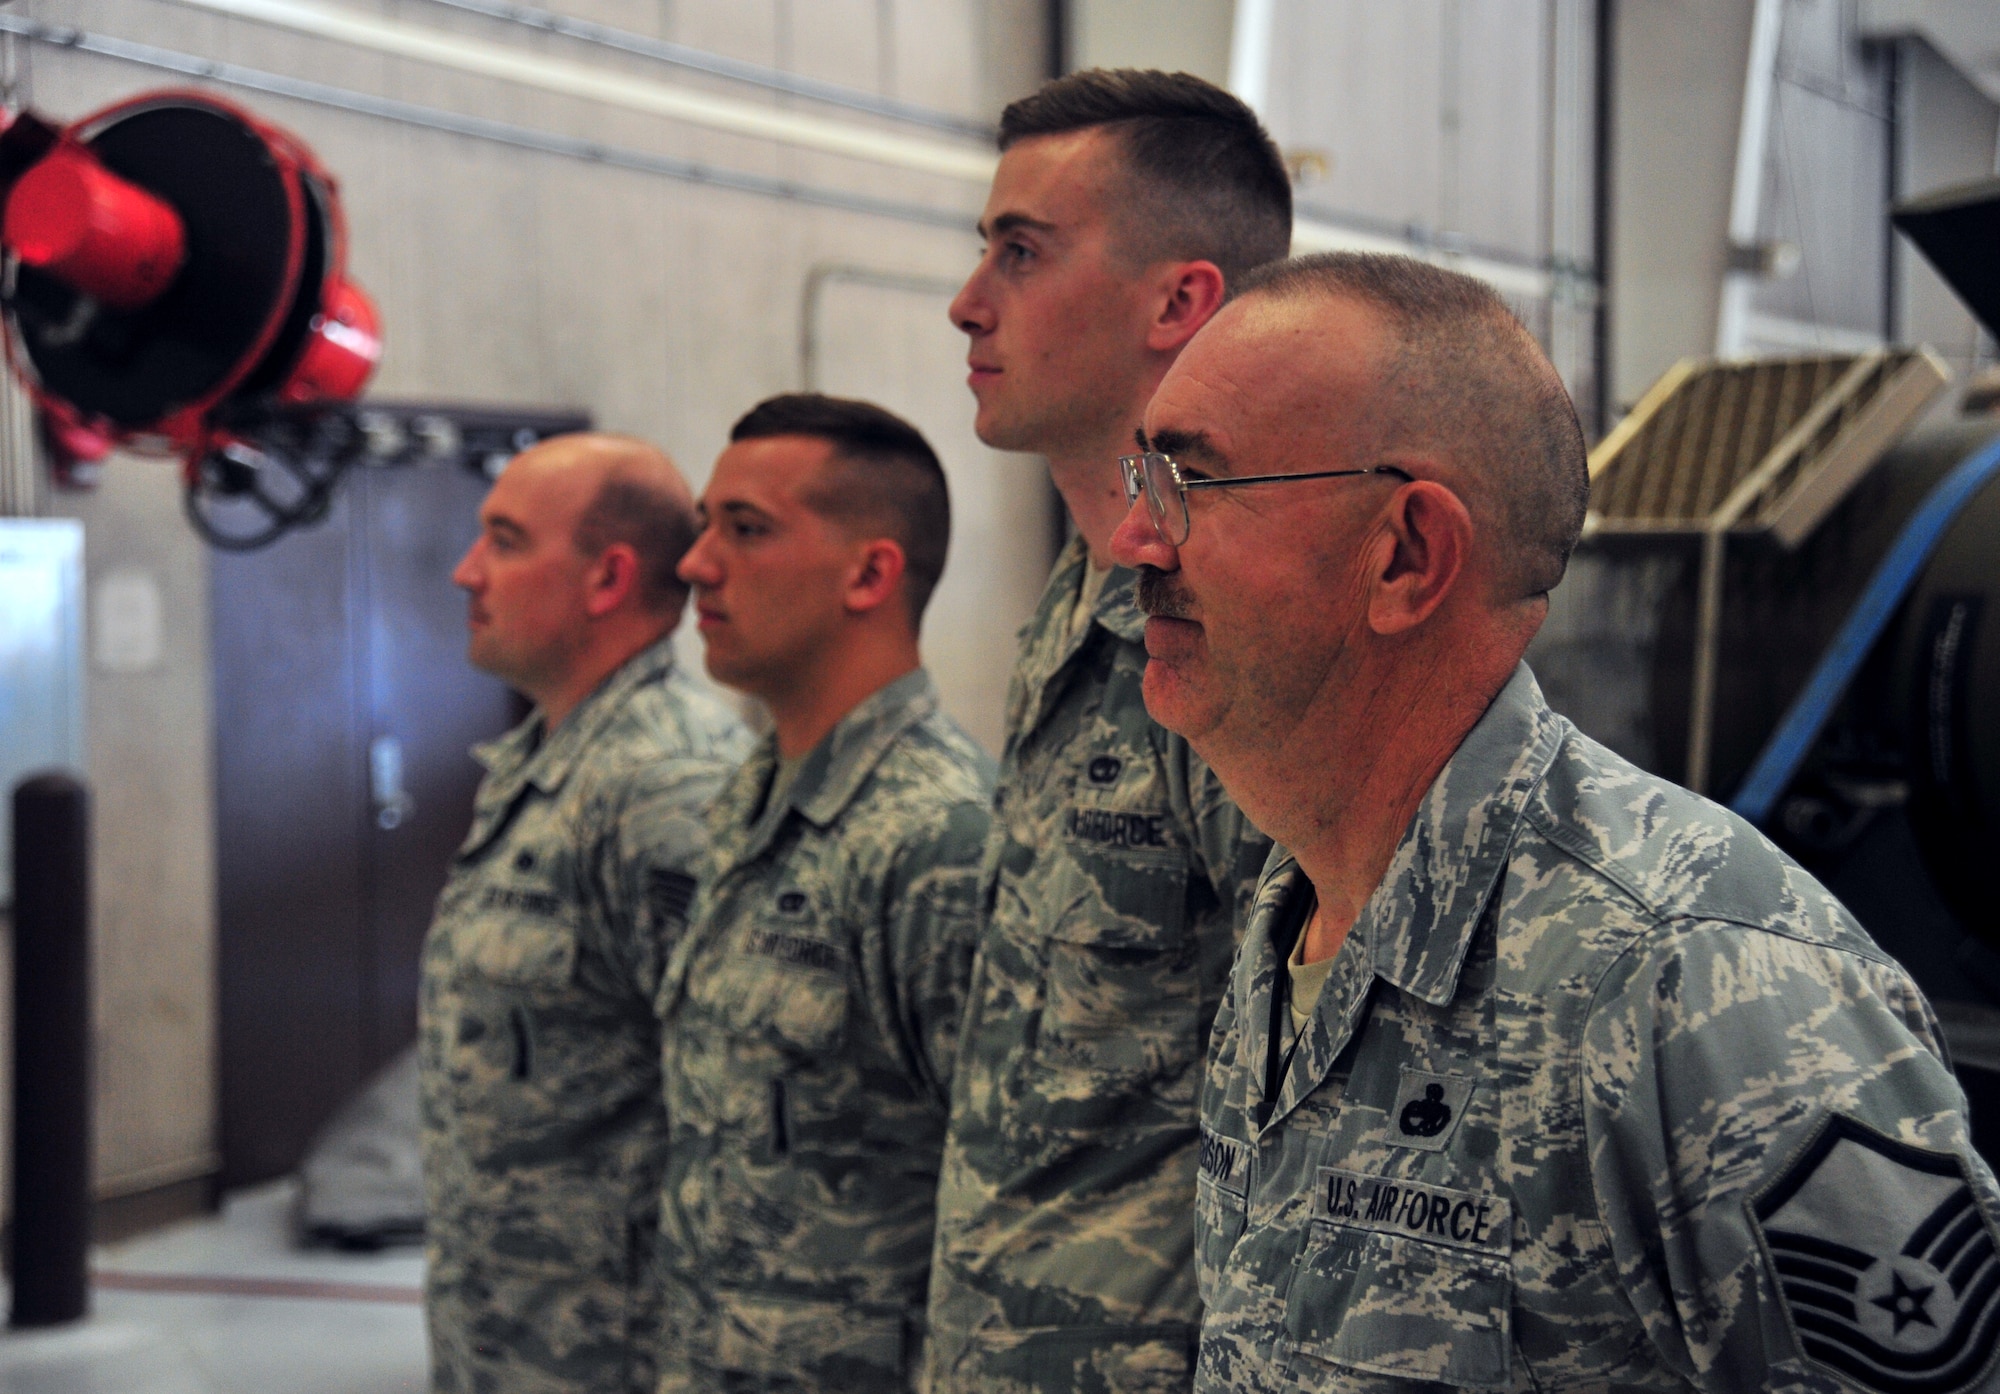 U.S. Air Force Master Sgt. Allen Anderson, an aircraft armament systems mechanic assigned to the 131st Aircraft Maintenance Squadron, stands beside the rest of his load crew prior to certification training at Whiteman Air Force Base, Mo., June 28, 2016. Airmen must be certified on each training munition before being allowed to load it onto aircraft. (U.S. Air Force photo by Senior Airman Jovan Banks)